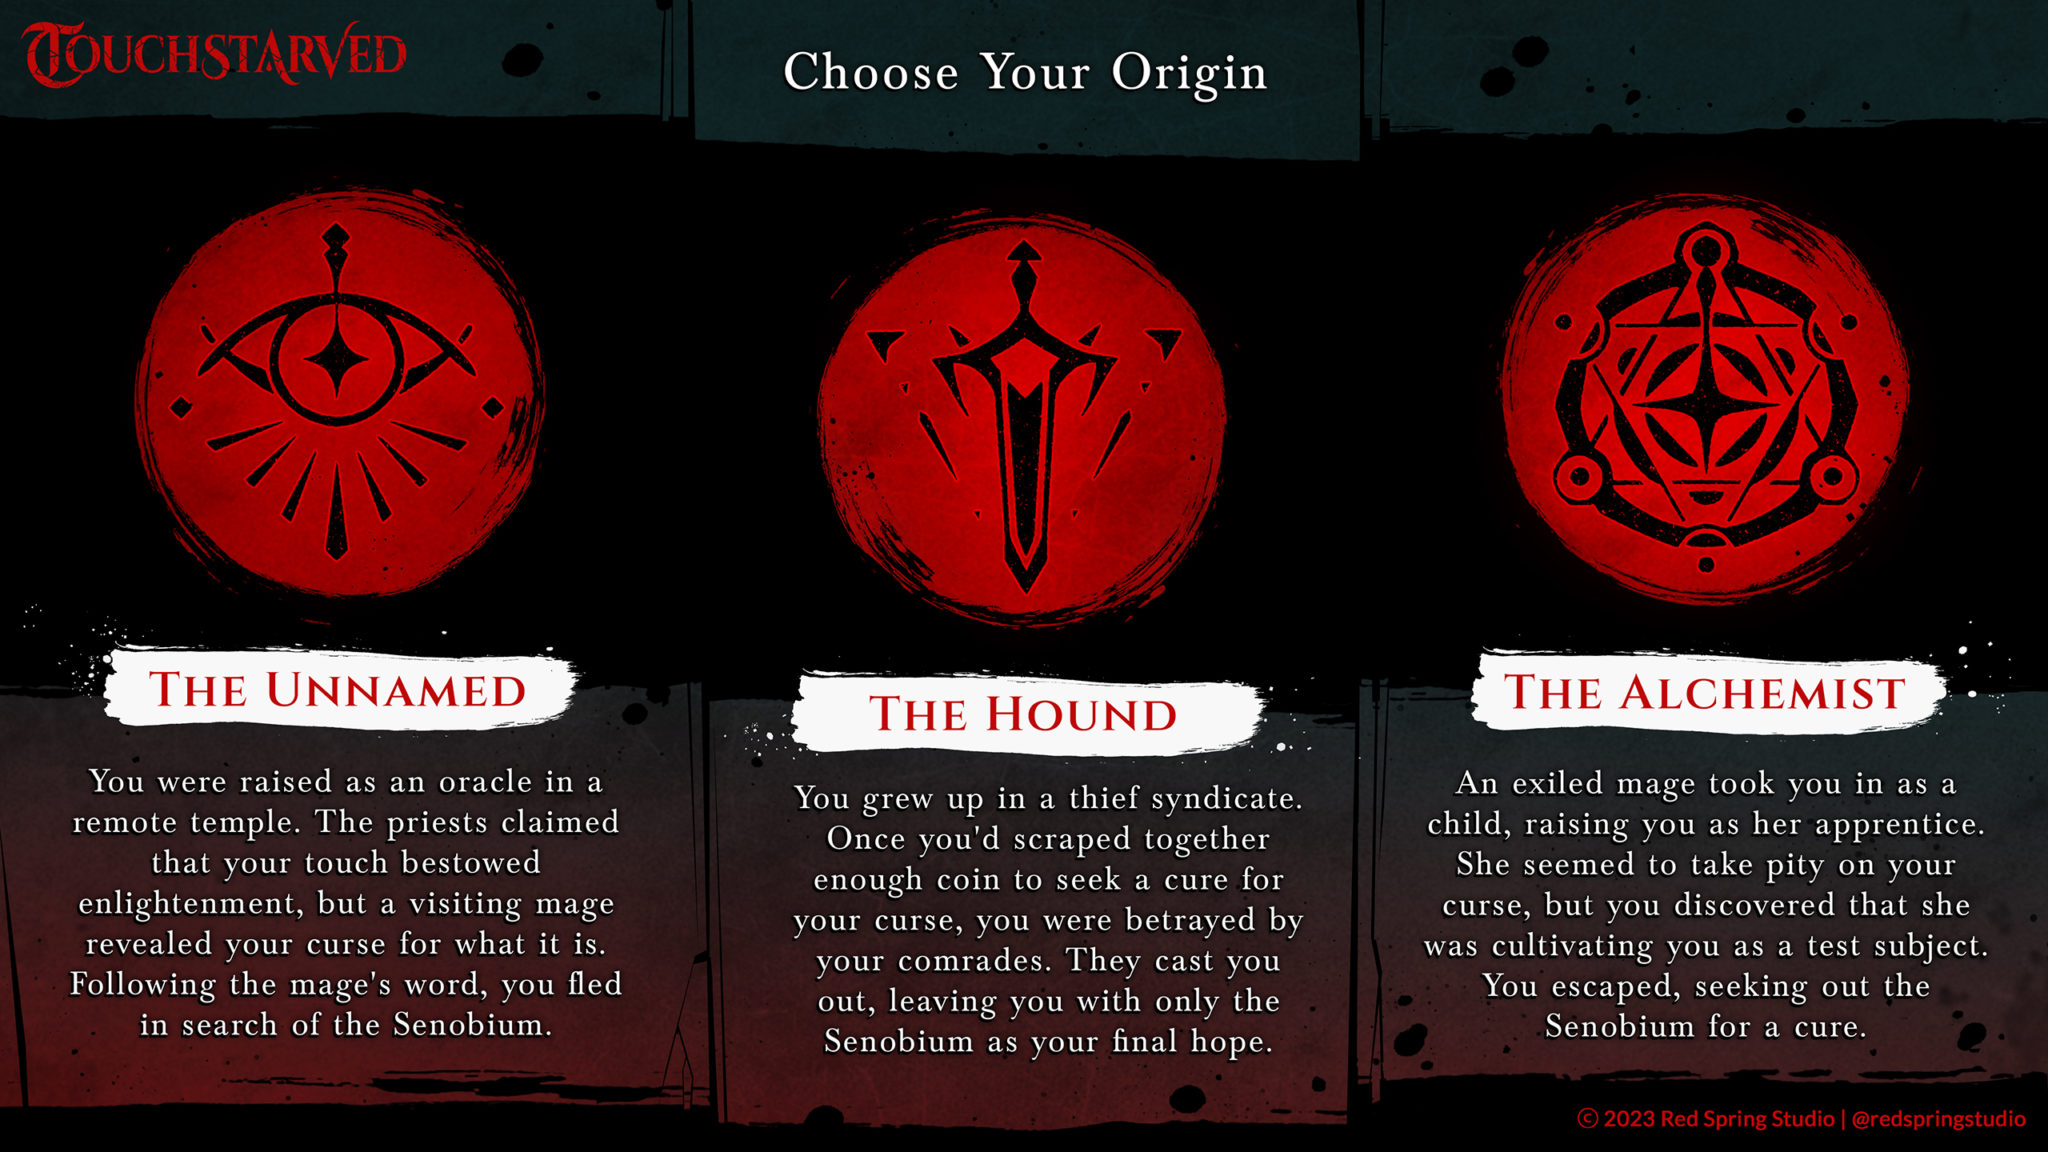 Descriptions of the three origin stories for the Touchstarved main character.